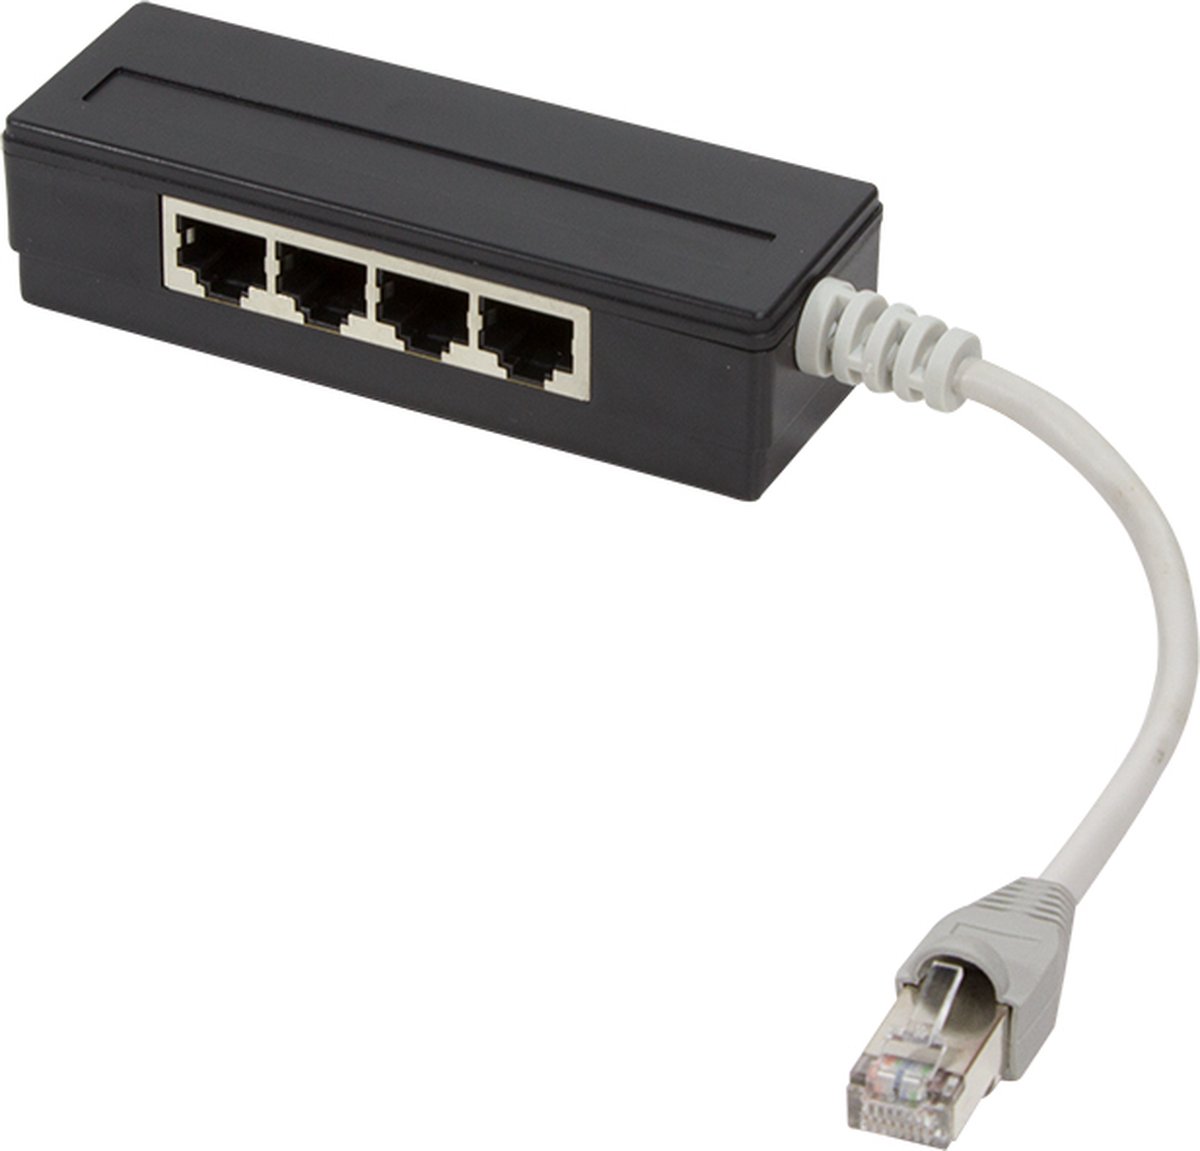 Logilink 4 Port RJ45 Splitter shielded with 15 cm cable (MP0032)